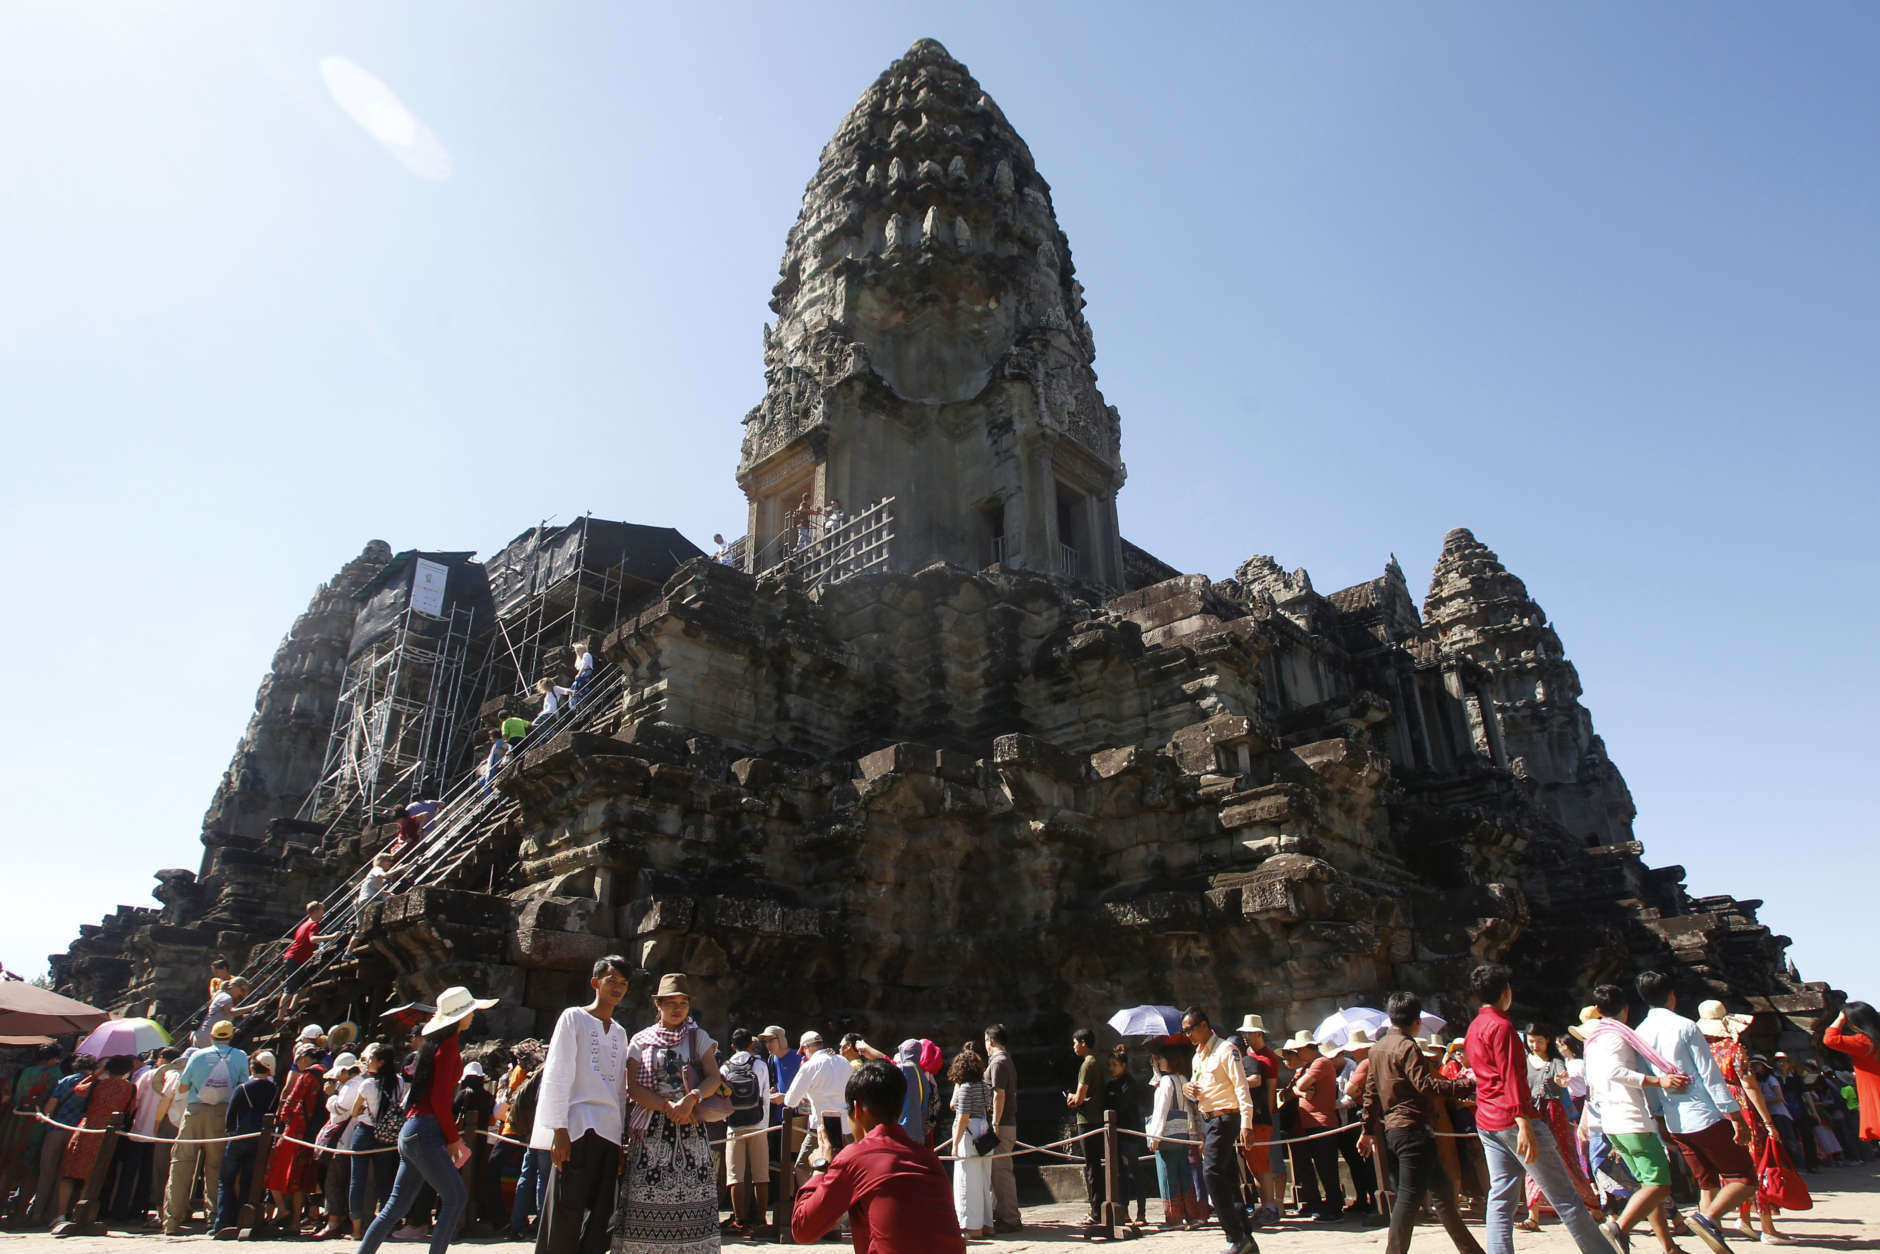 In this Sunday, Dec. 31, 2017, photo, tourists line up for stepping up Angkor Wat temple outside Siem Reap, Cambodia. Tourists celebrated New Year at Angkor Wat temple where is Cambodia's main tourist destination. The temples, built between the 9th and 15th centuries. (AP Photo/Heng Sinith)